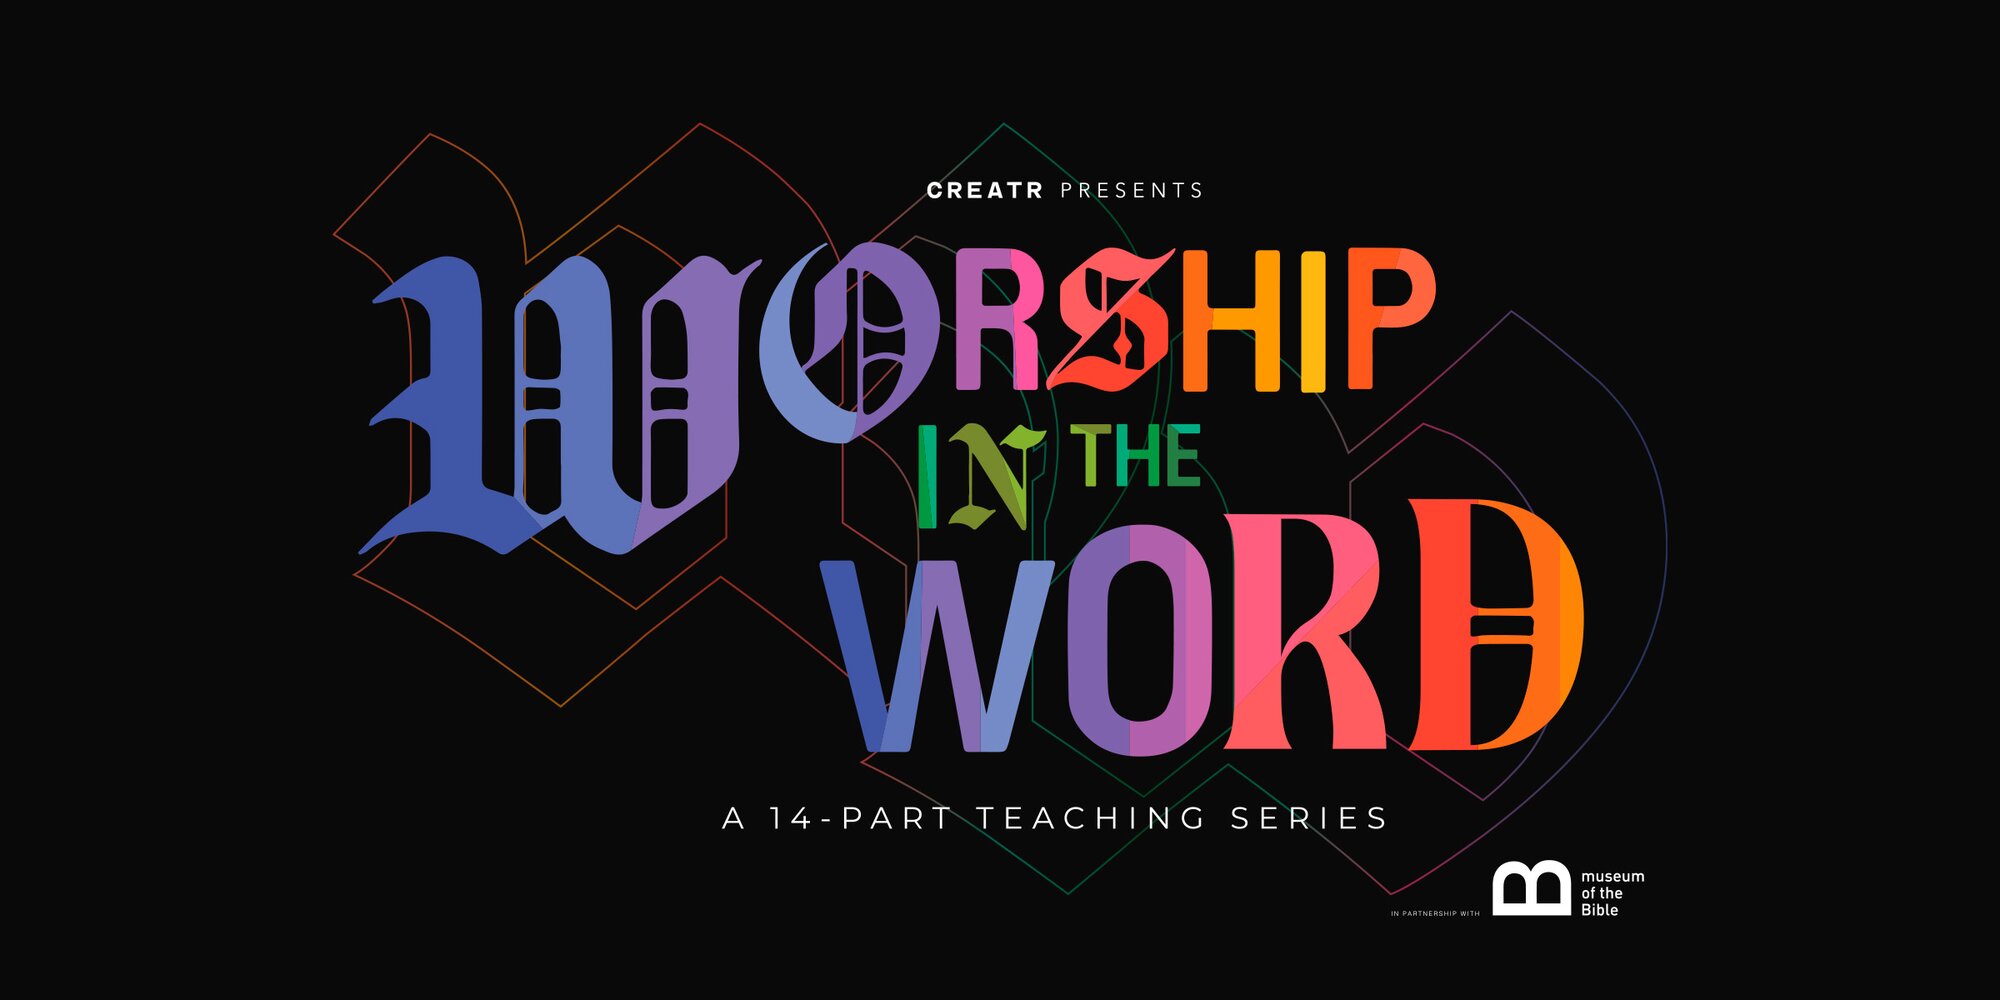 Worship In the Word